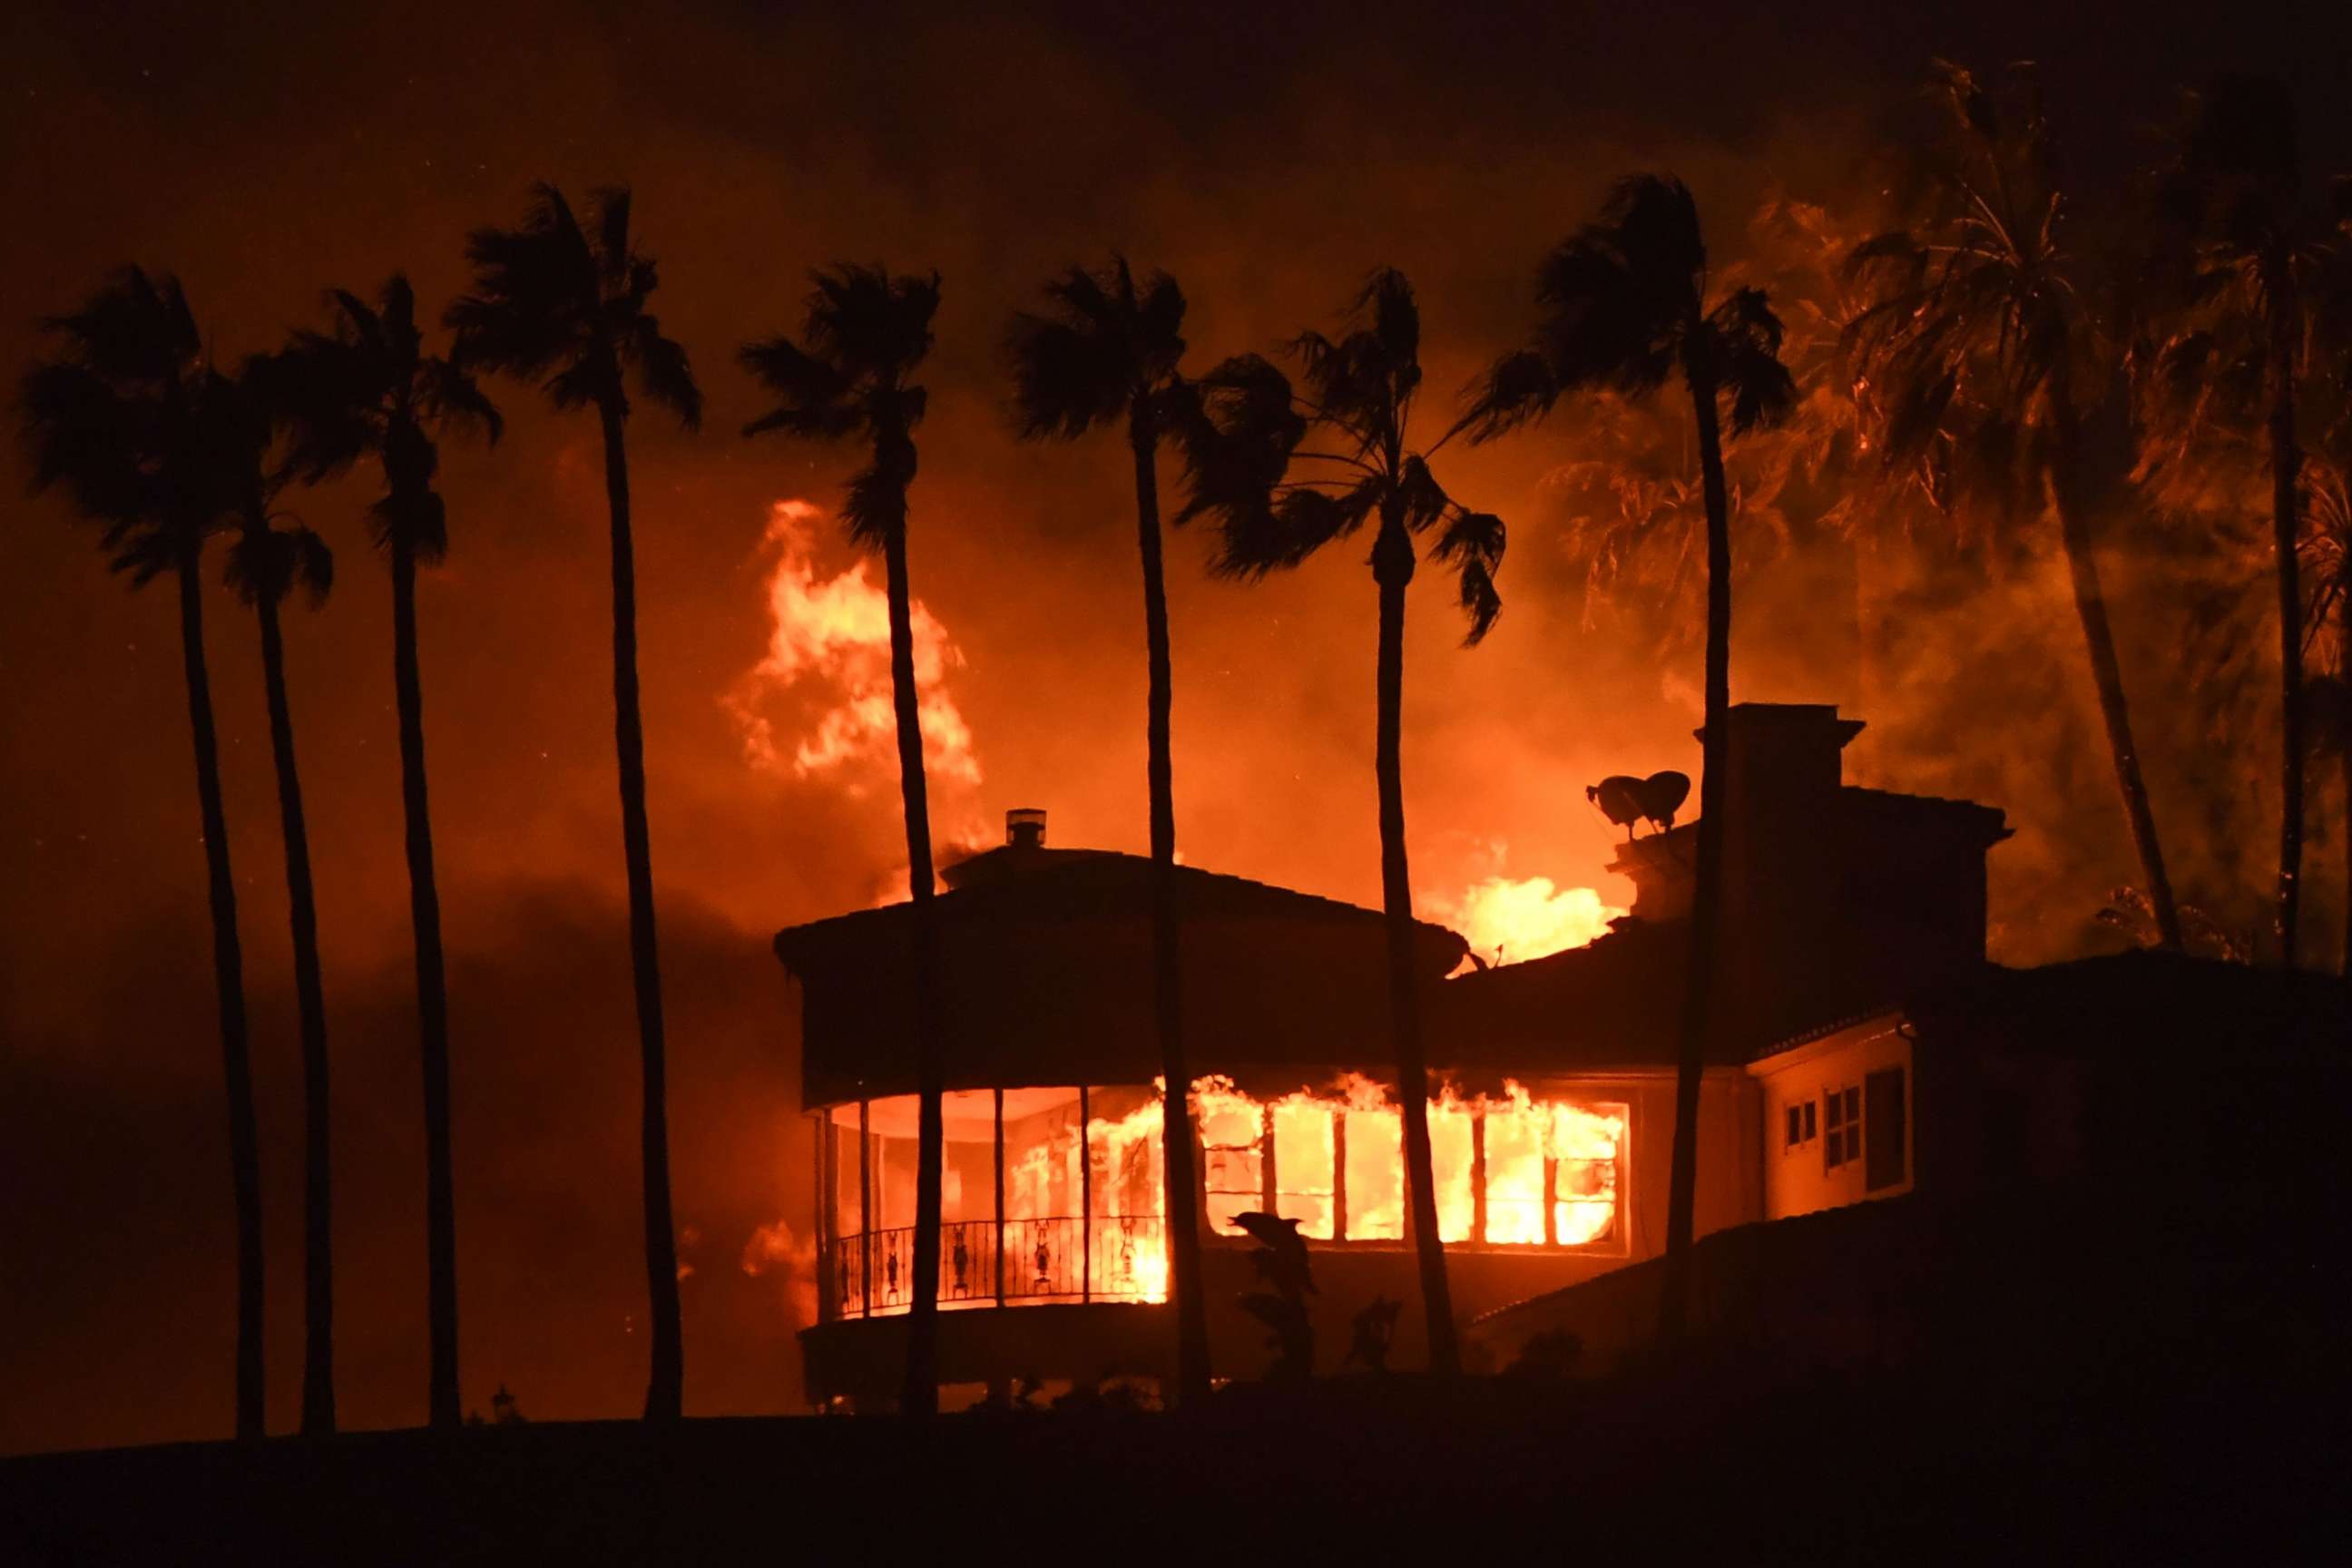 PHOTO: A house burns during the Woolsey Fire on Nov. 9, 2018 in Malibu, Calif.